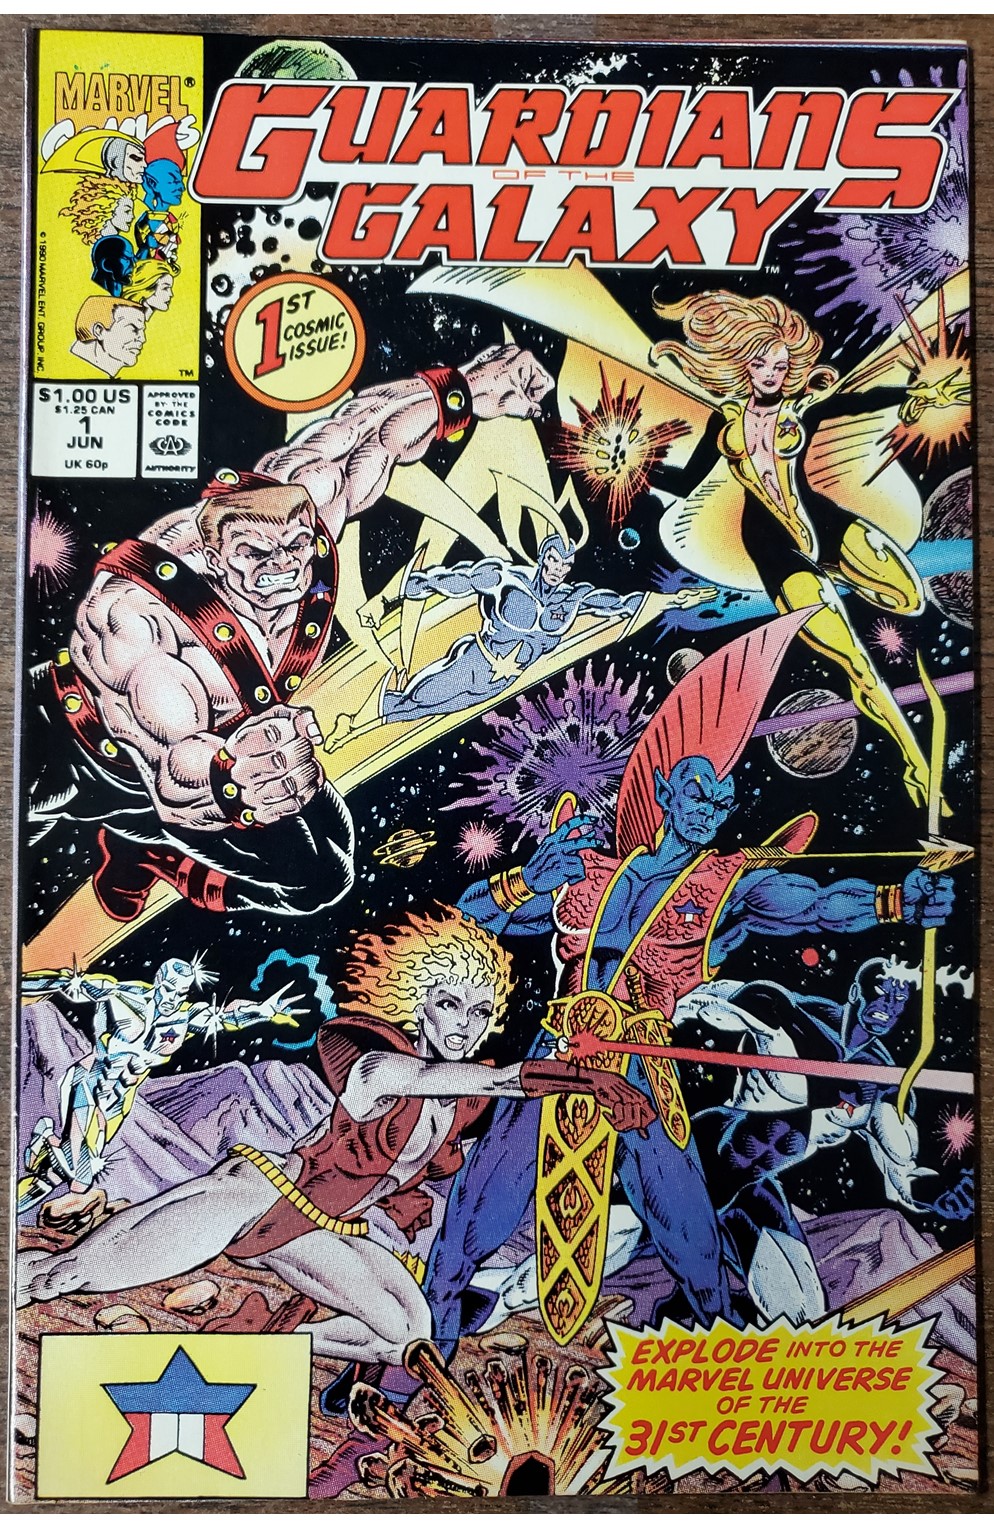 Guardians of the Galaxy #1 (Marvel 1990)